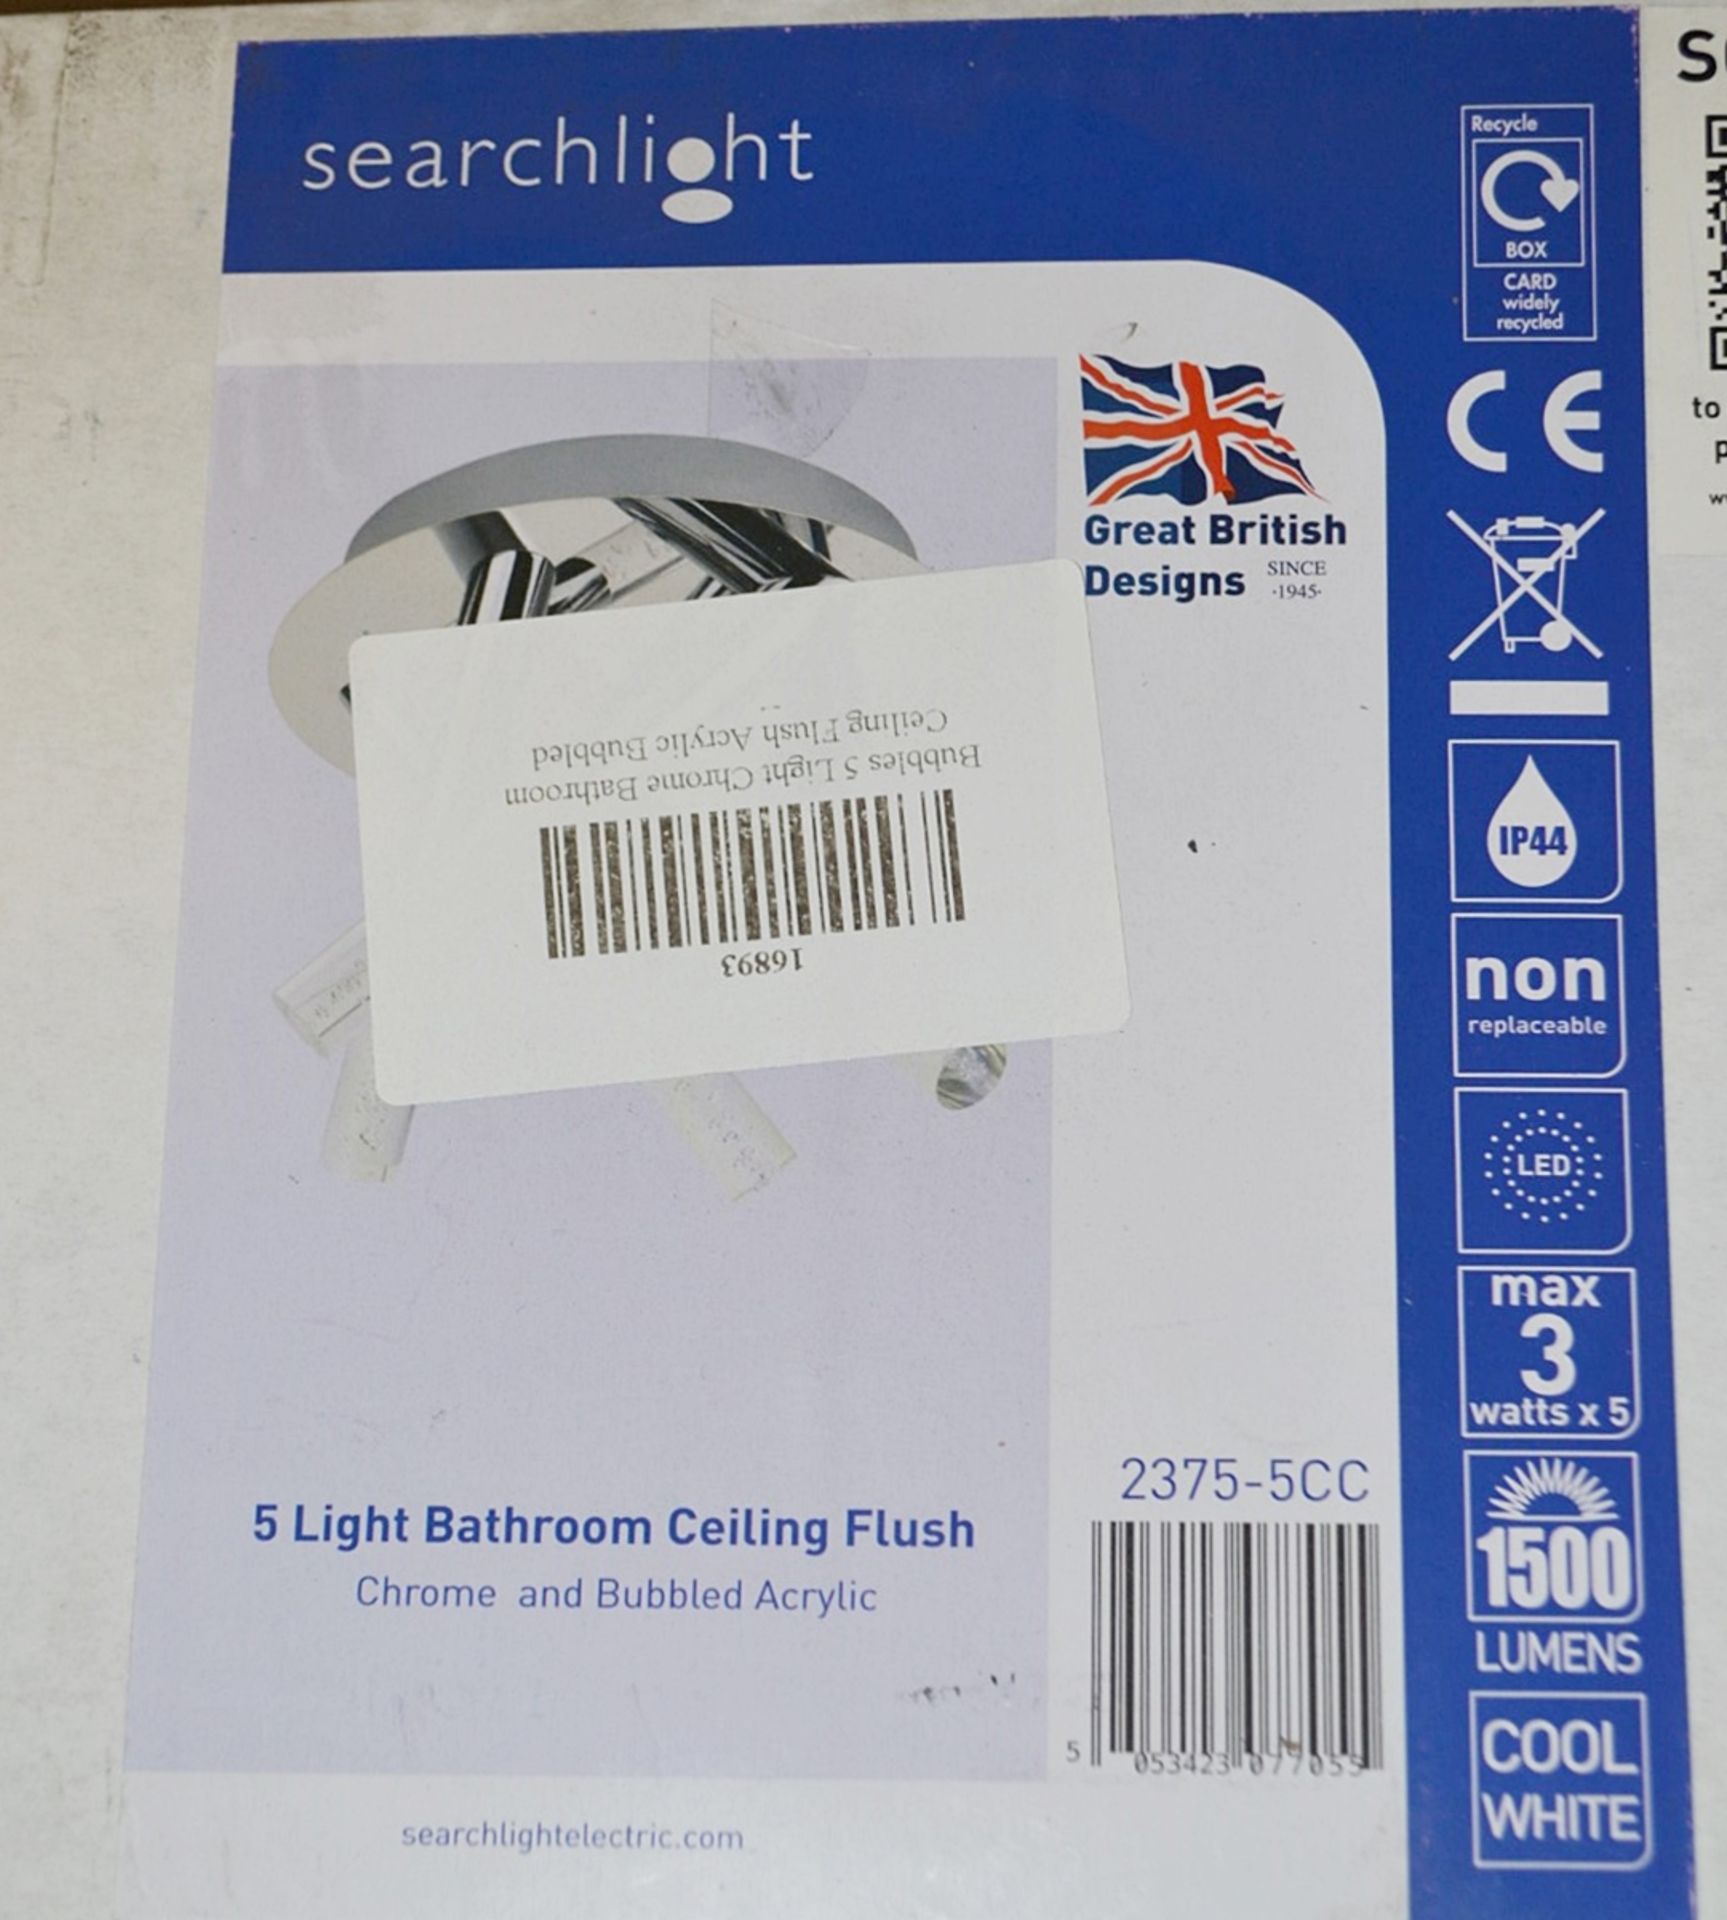 2 x Searchlight 5-Light Bathroom Ceiling Flush with Bubbled Acrylic and Chrome Rods - 2375-5CC - New - Image 2 of 3